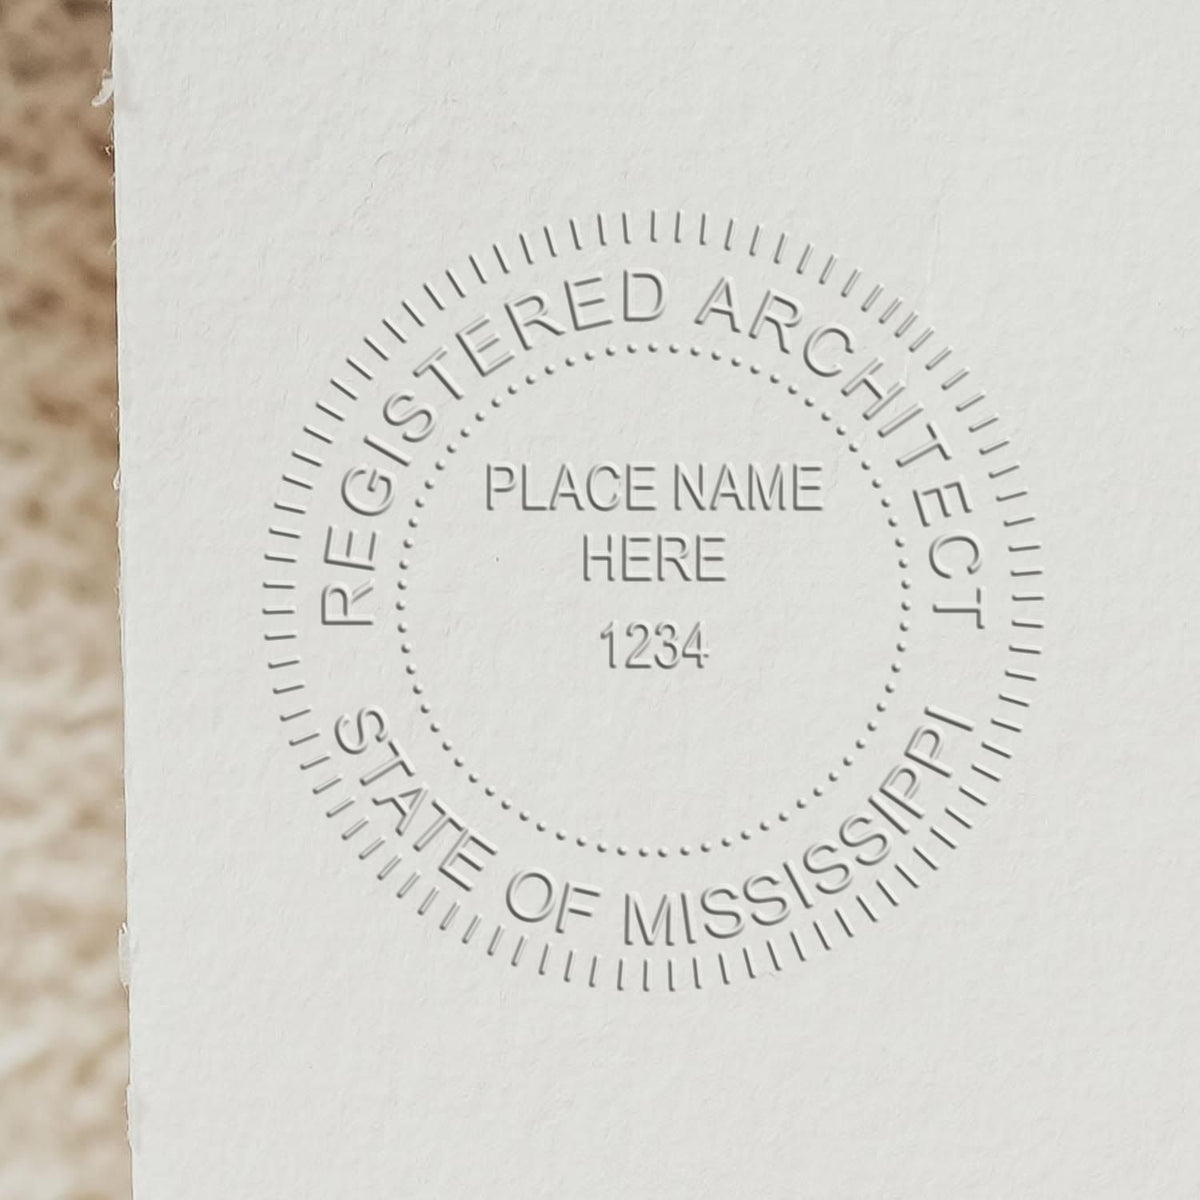 An alternative view of the State of Mississippi Long Reach Architectural Embossing Seal stamped on a sheet of paper showing the image in use